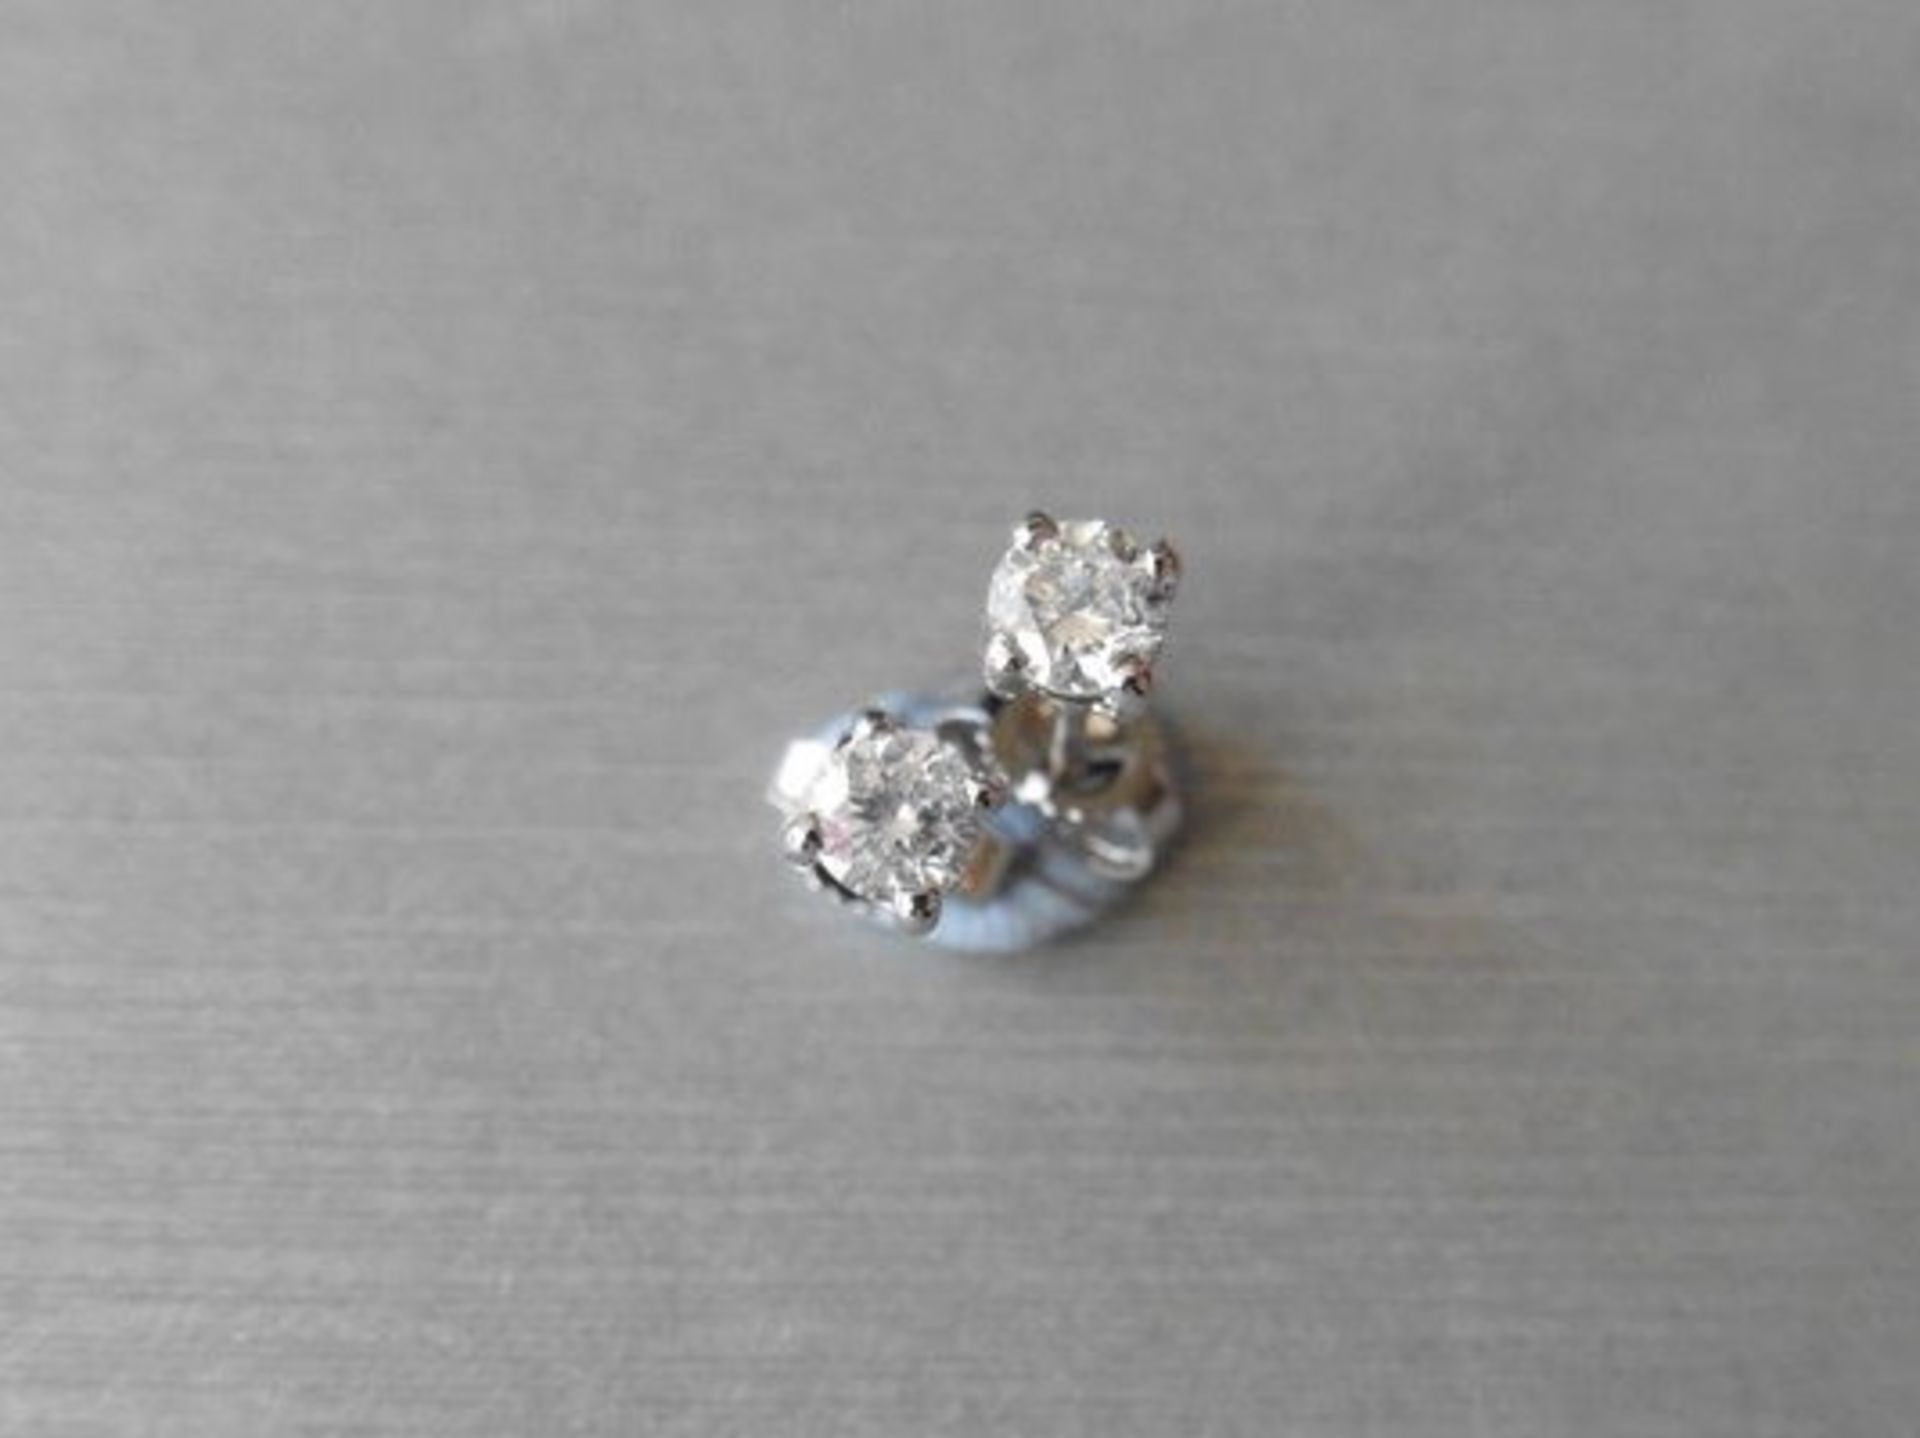 0.30ct diamond solitaire stud earrings set in platinum. I colour, si3 clarity. 4 claw setting with